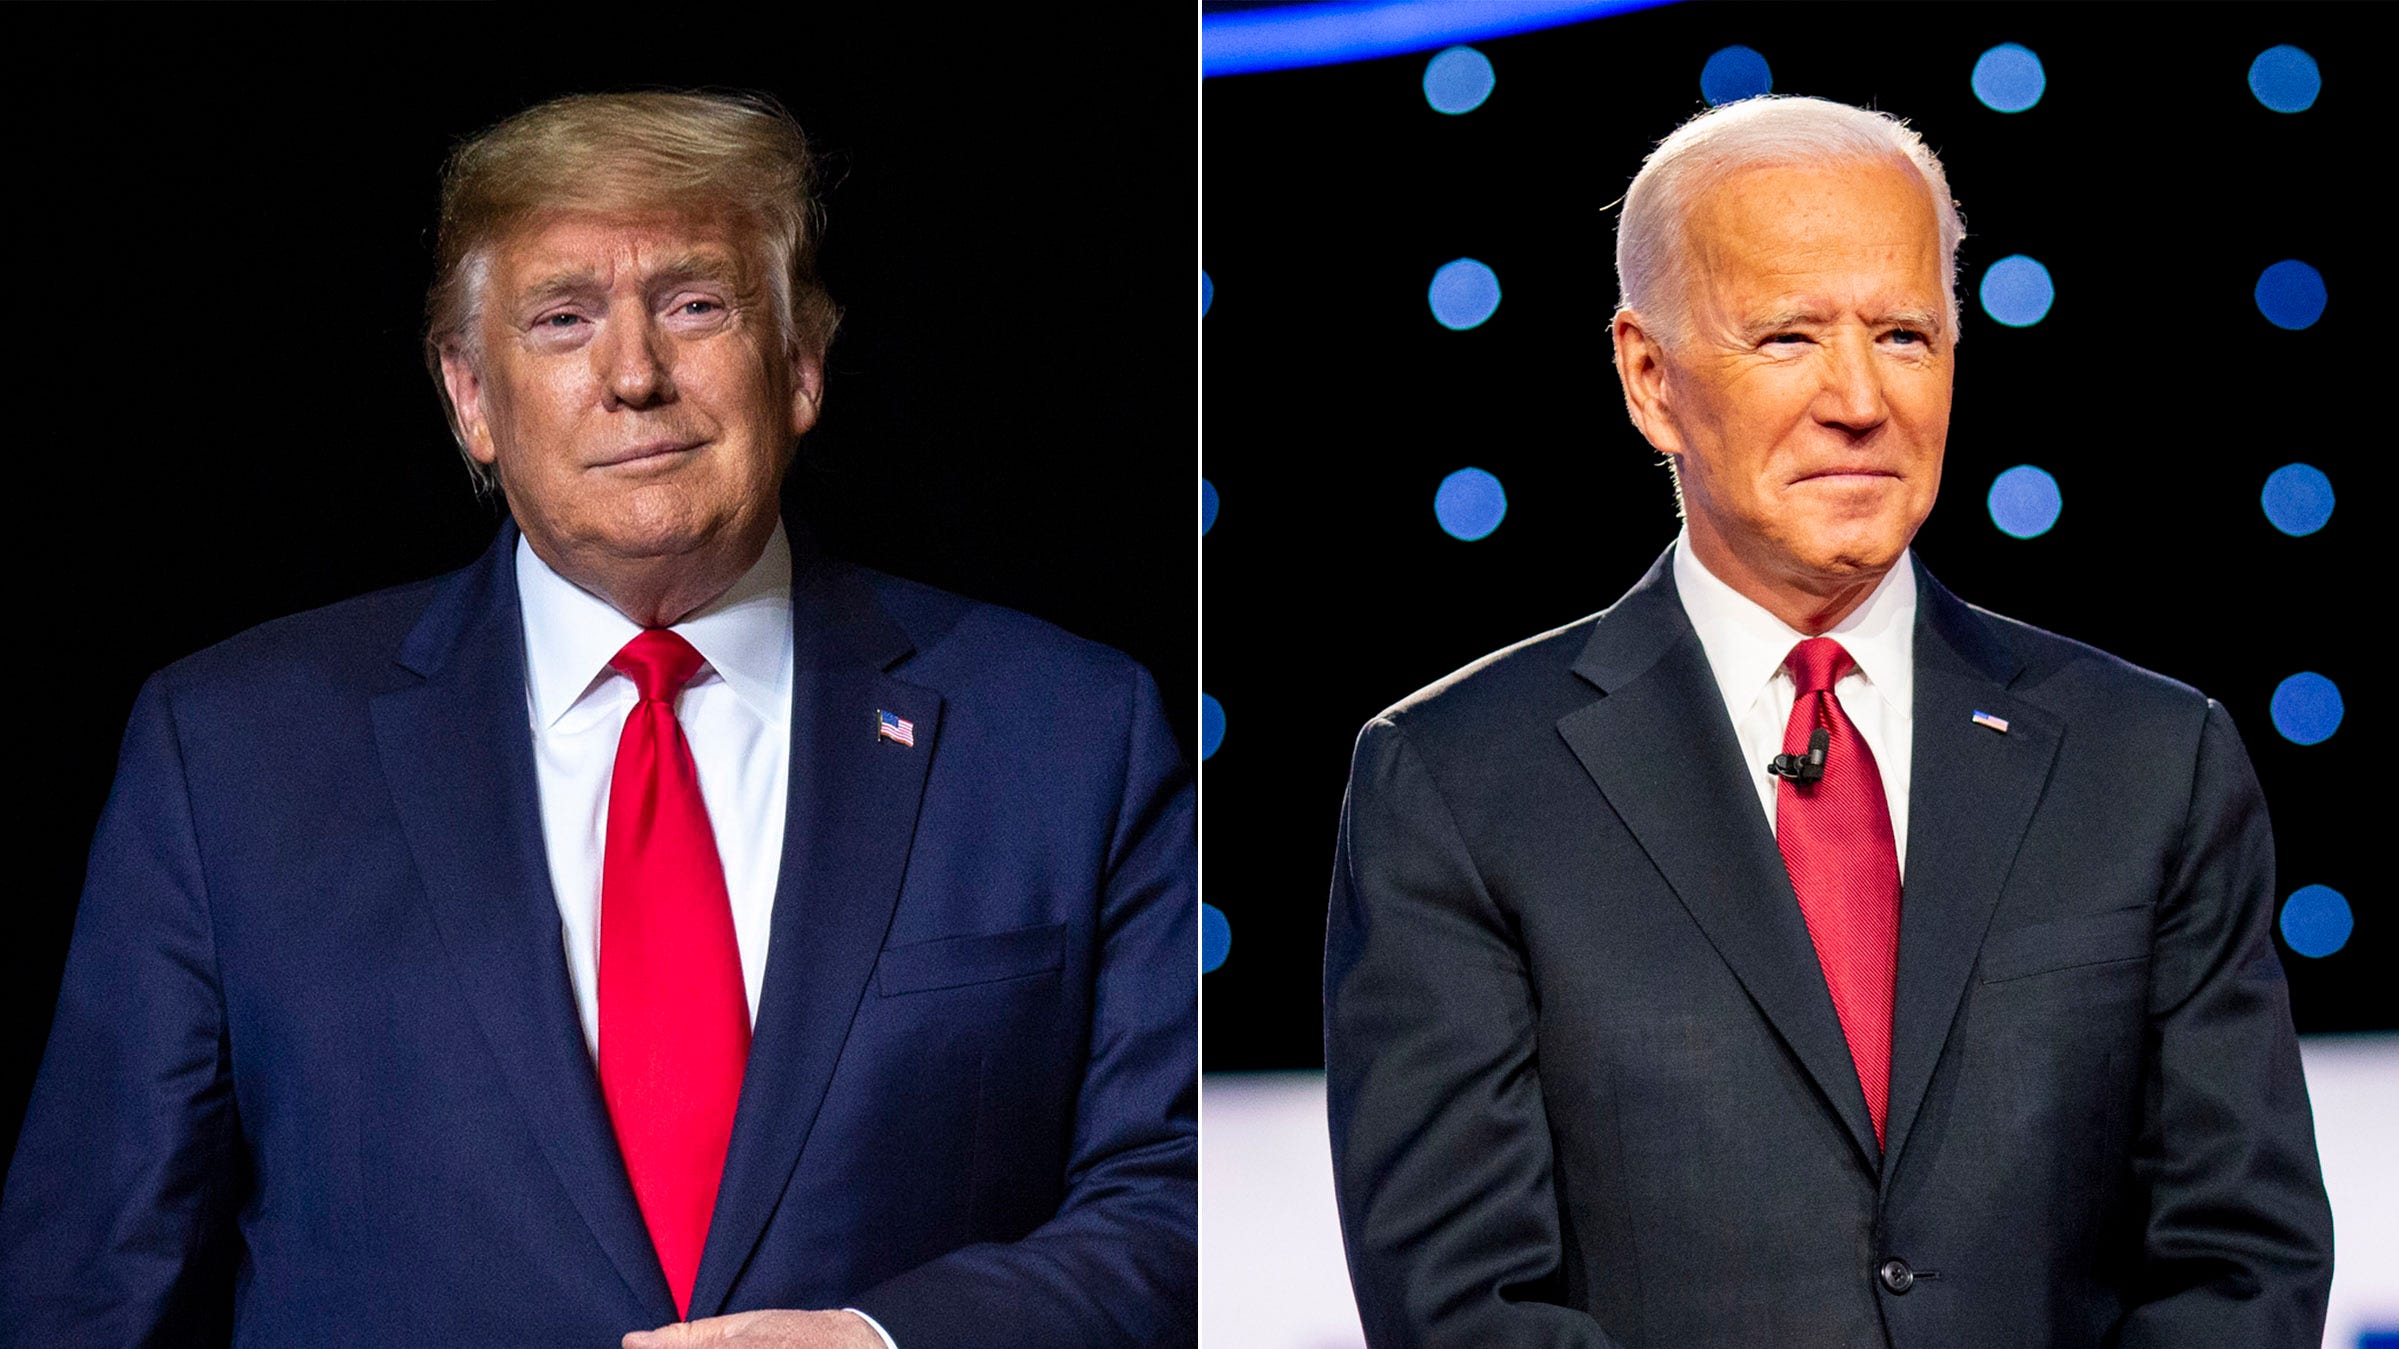 Presidential debate Is economic recovery a Trump 'V' or a Biden 'K'?